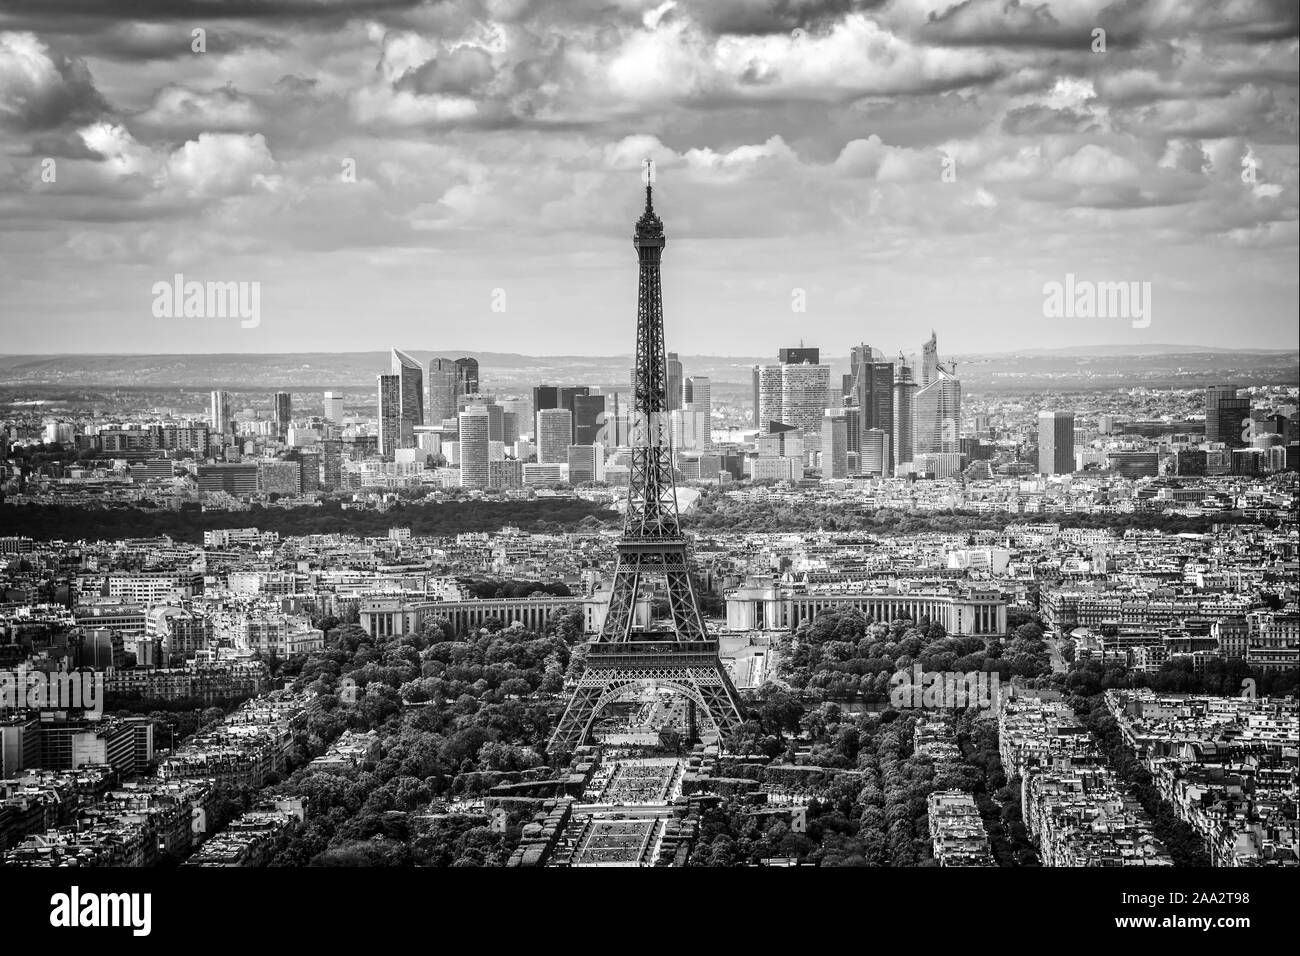 Aerial scenic view of Paris with the Eiffel tower and la Defense business district skyline, black and white Stock Photo